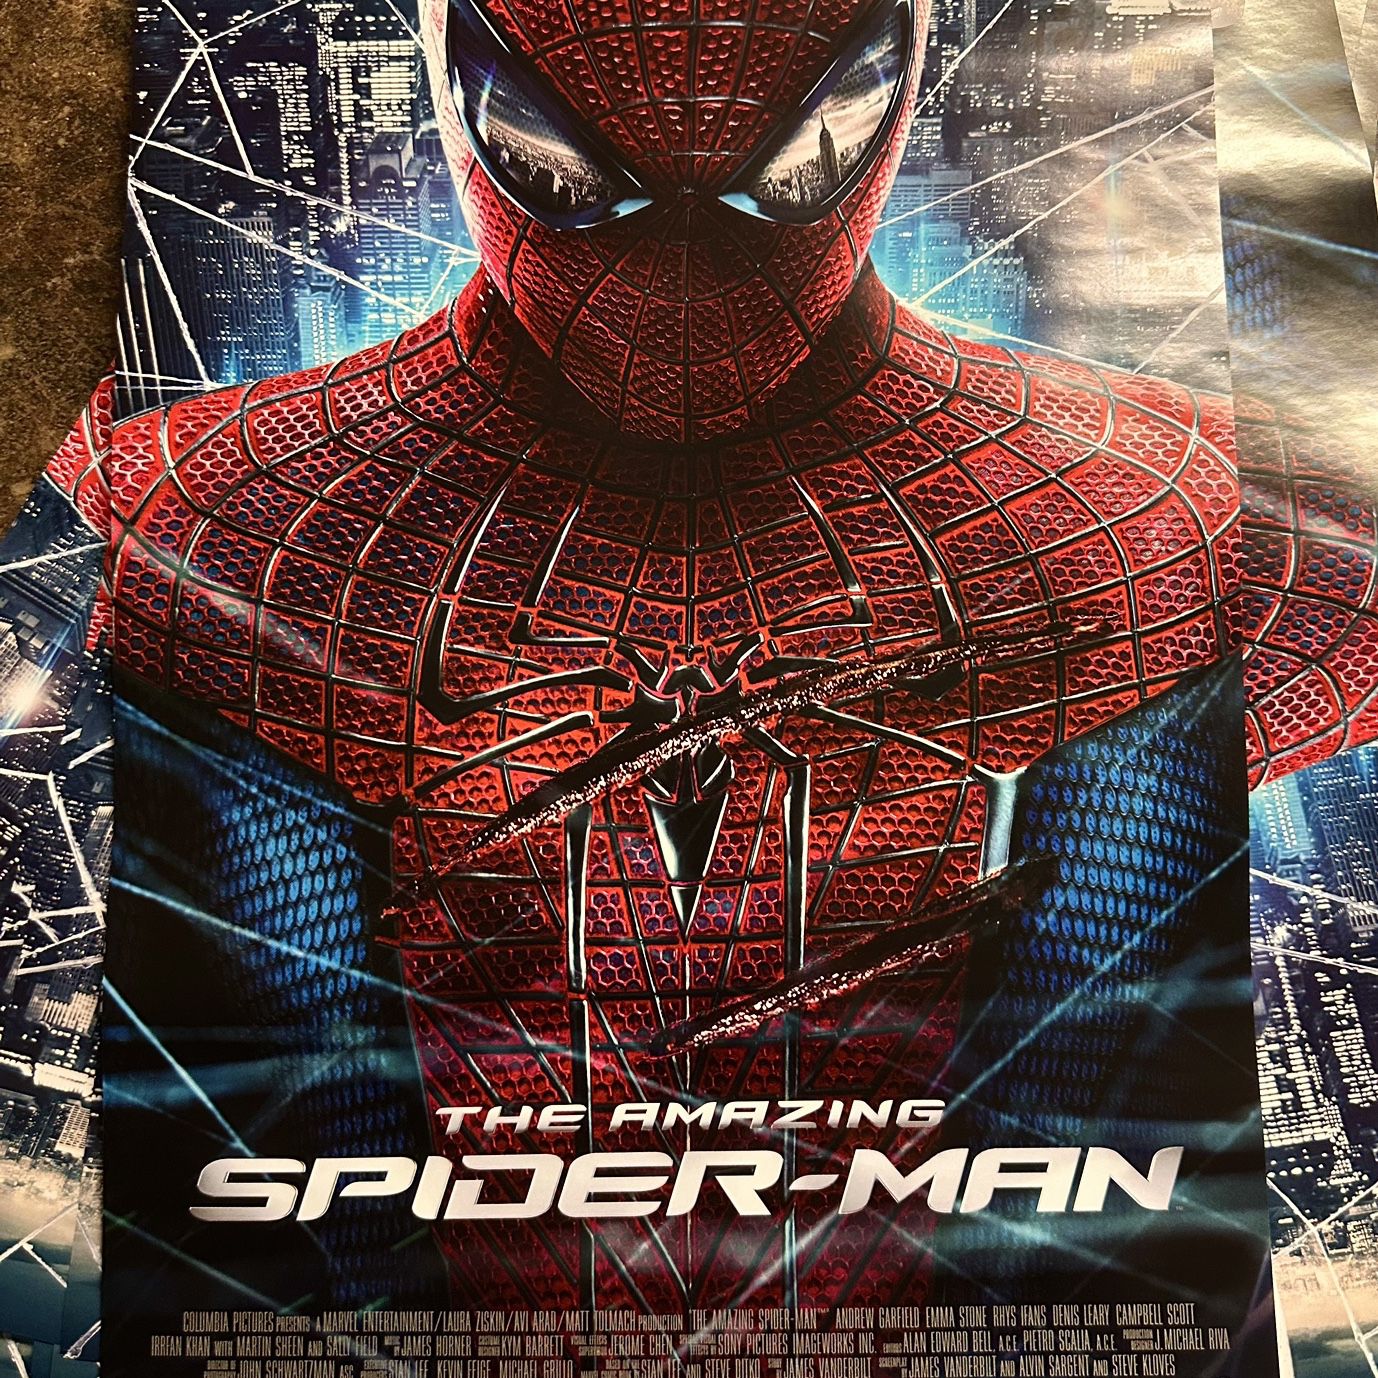 The Amazing Spider-Man (2012) Movie Poster [Originals From AMC Theater]